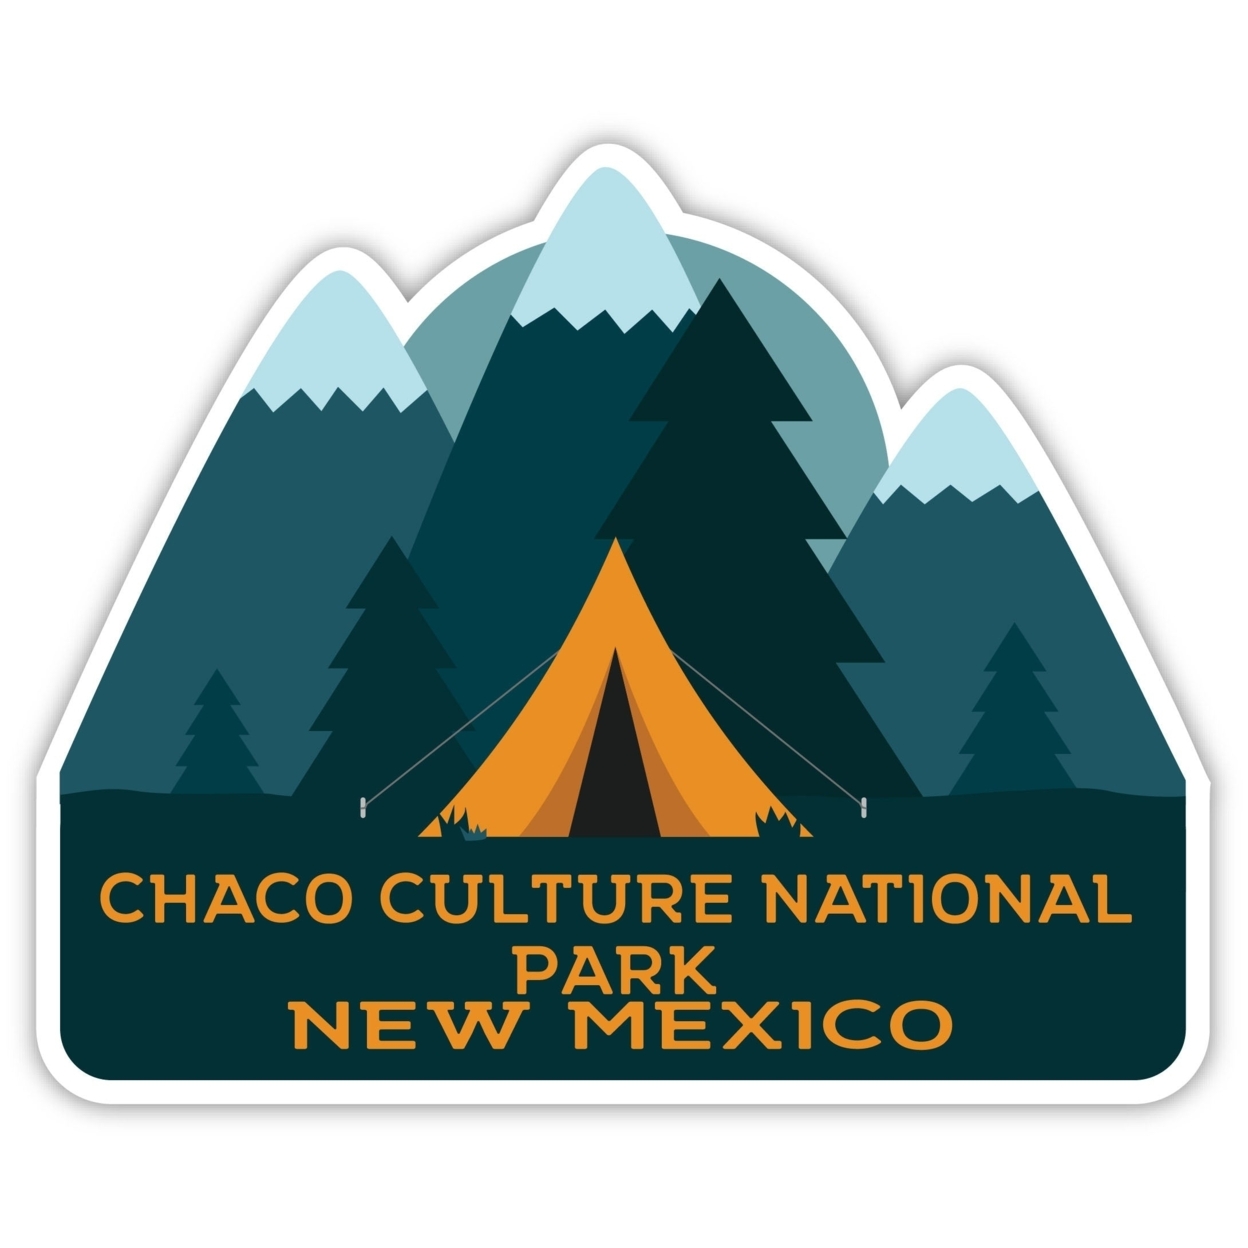 Chaco Culture National Park New Mexico Souvenir Decorative Stickers (Choose Theme And Size) - 4-Pack, 2-Inch, Tent